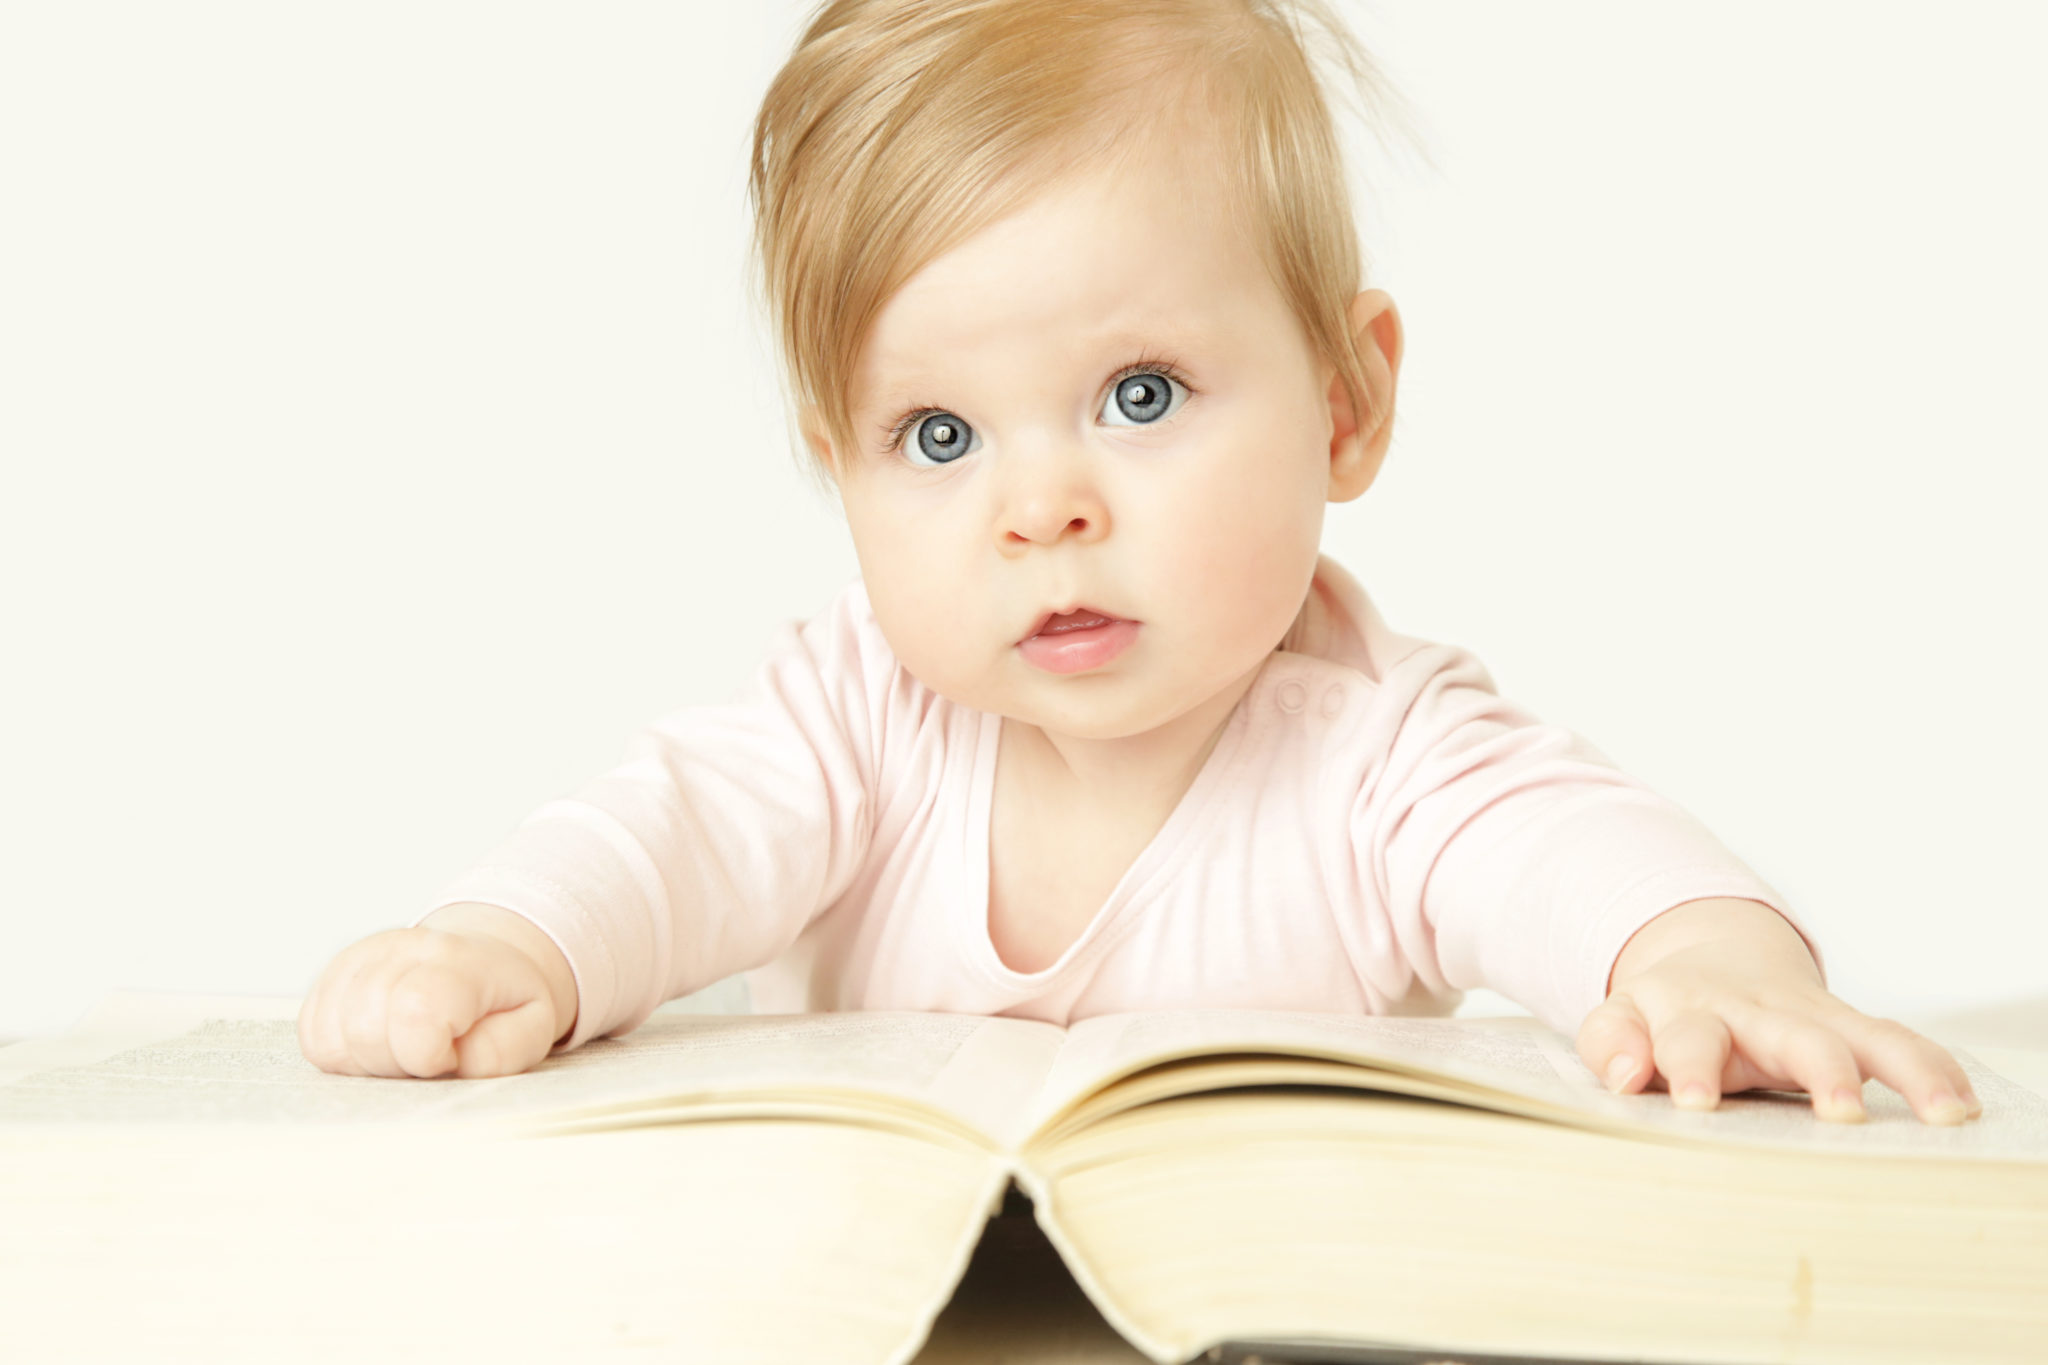 Adorable baby in front of big thick book, studio shot